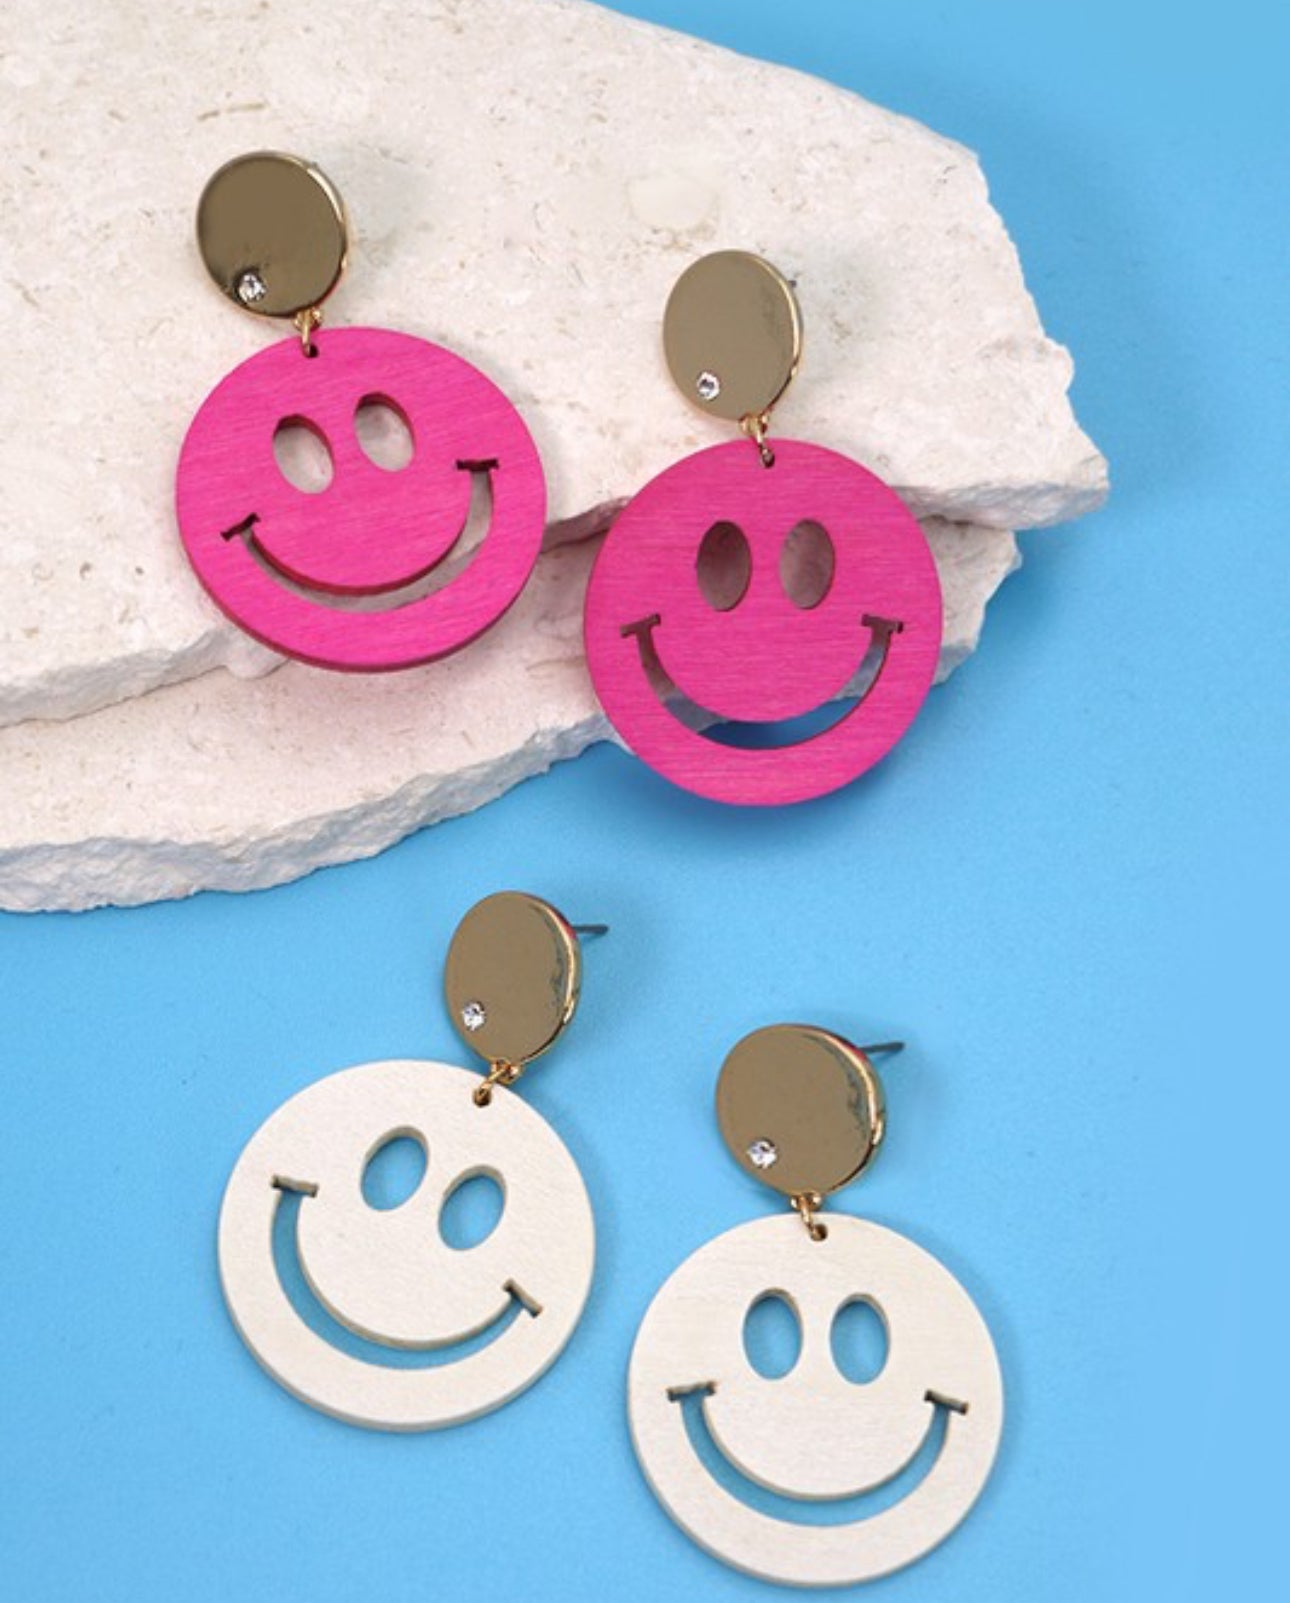 The Wooden Smiley Face Earring